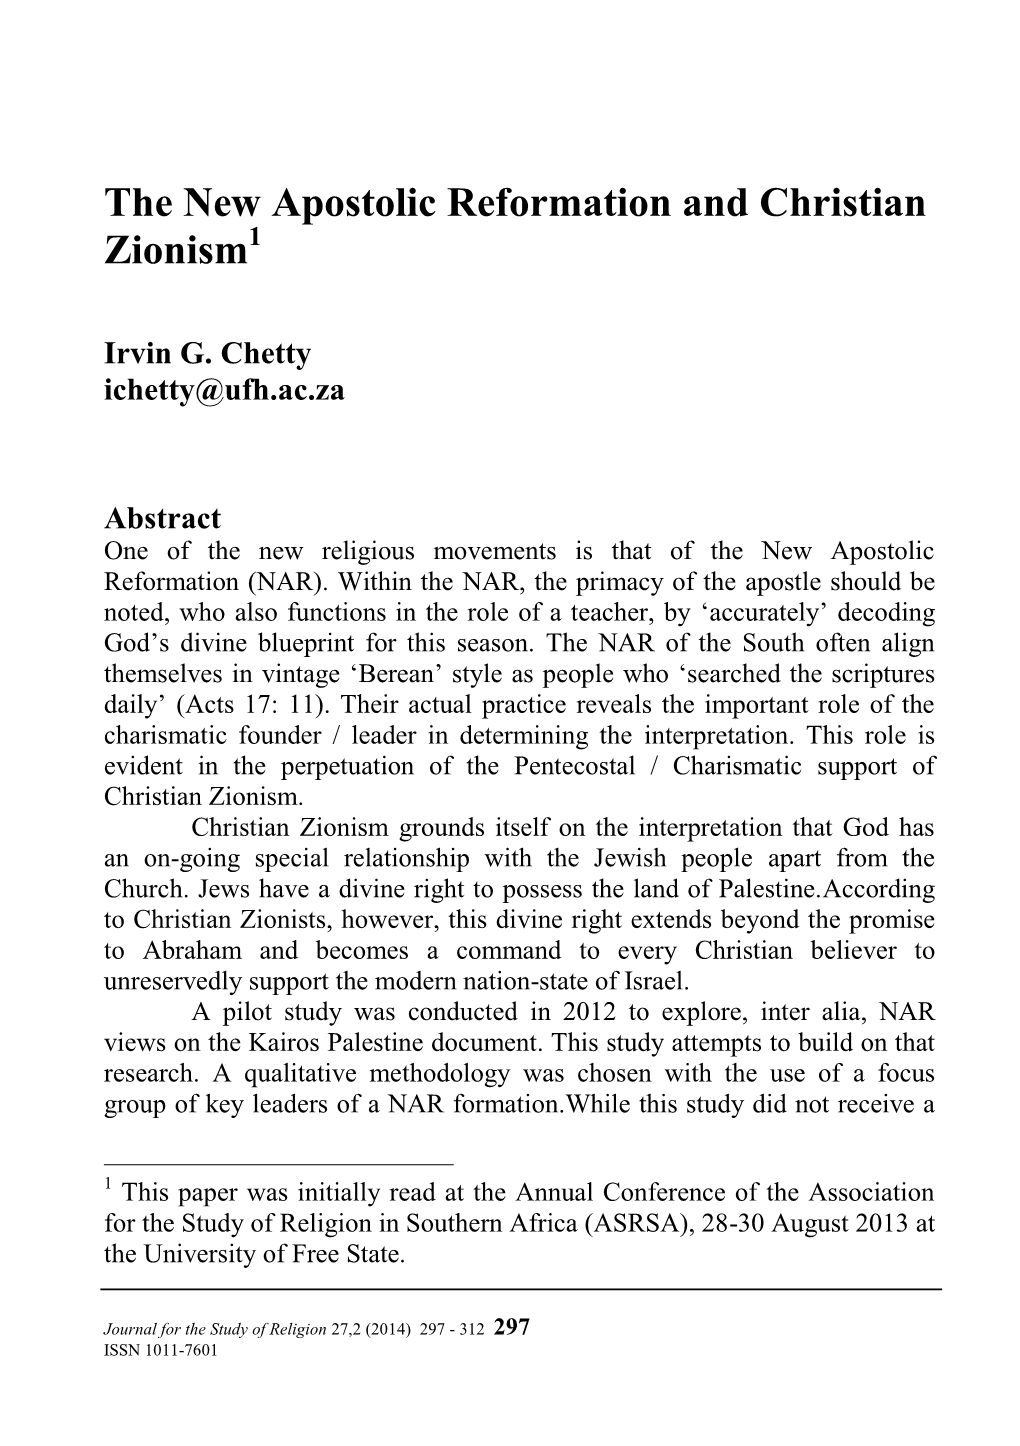 The New Apostolic Reformation and Christian Zionism1